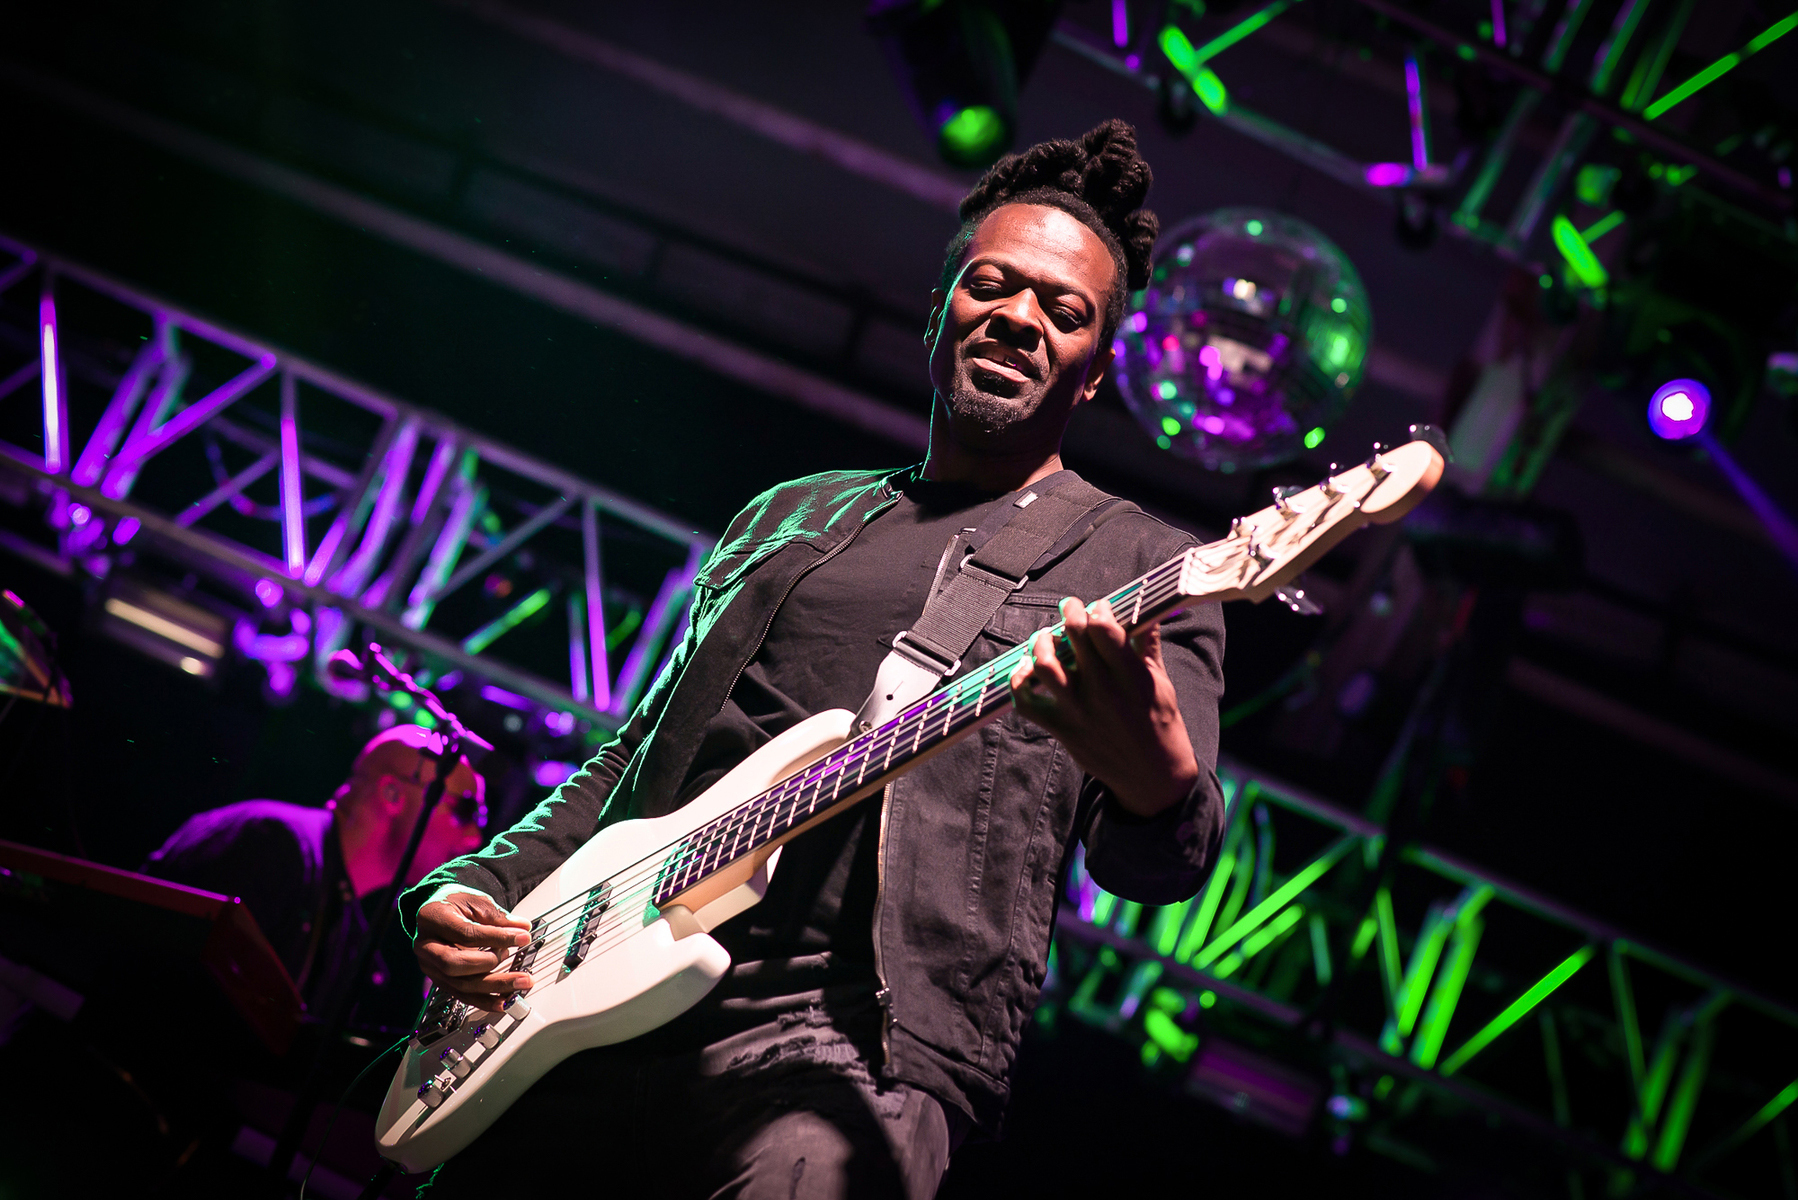 Anthony Hamilton's bass guitarist on stage in concert